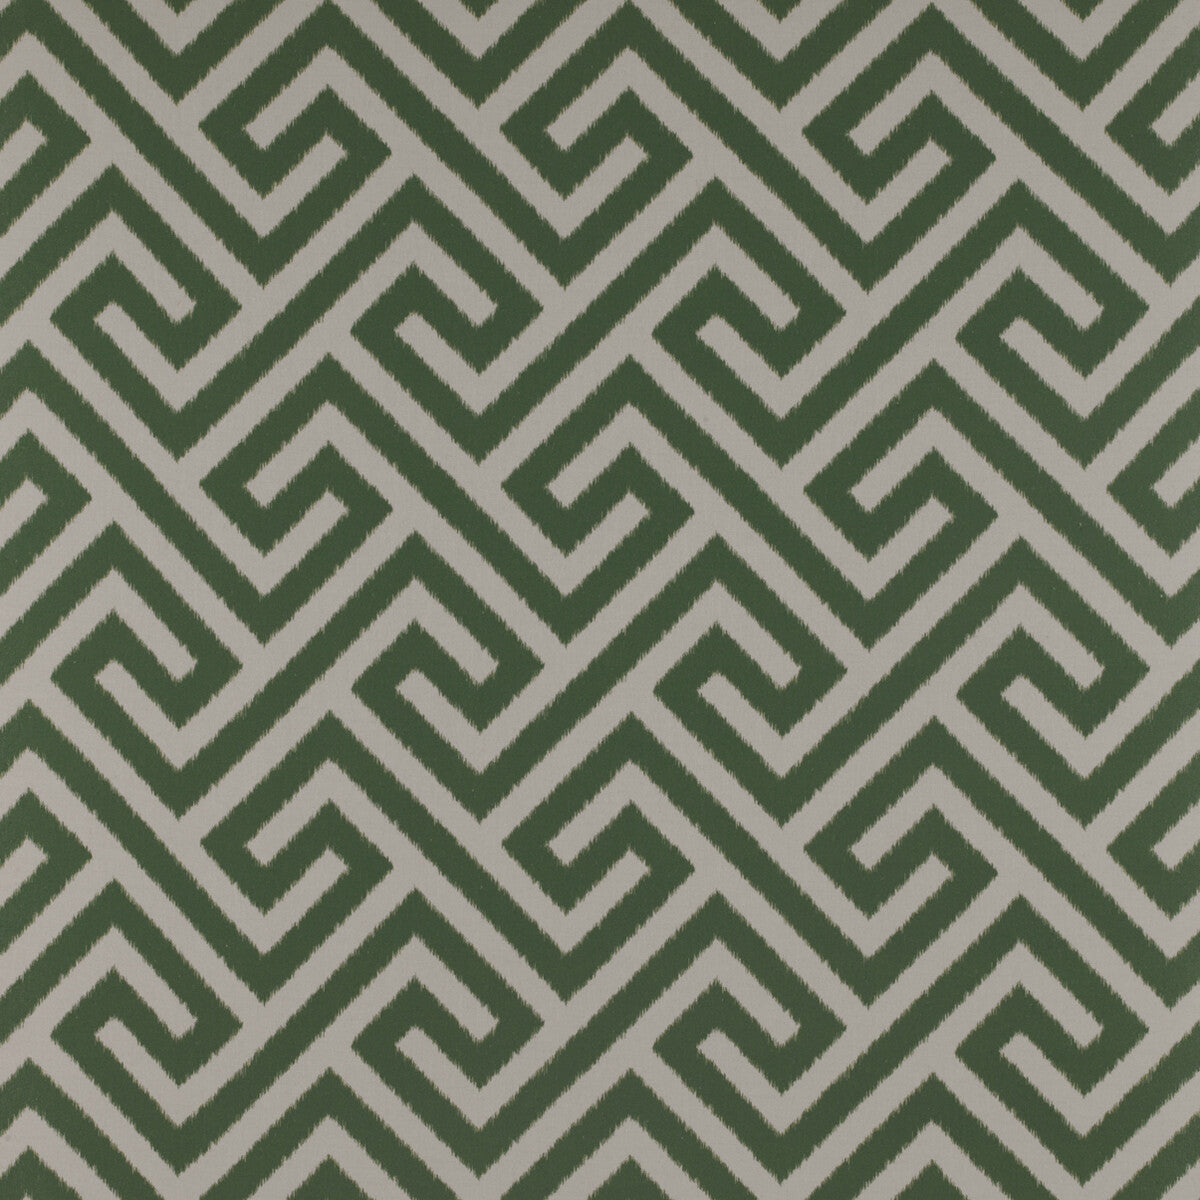 Trevi fabric in verde color - pattern GDT5337.001.0 - by Gaston y Daniela in the Tierras collection